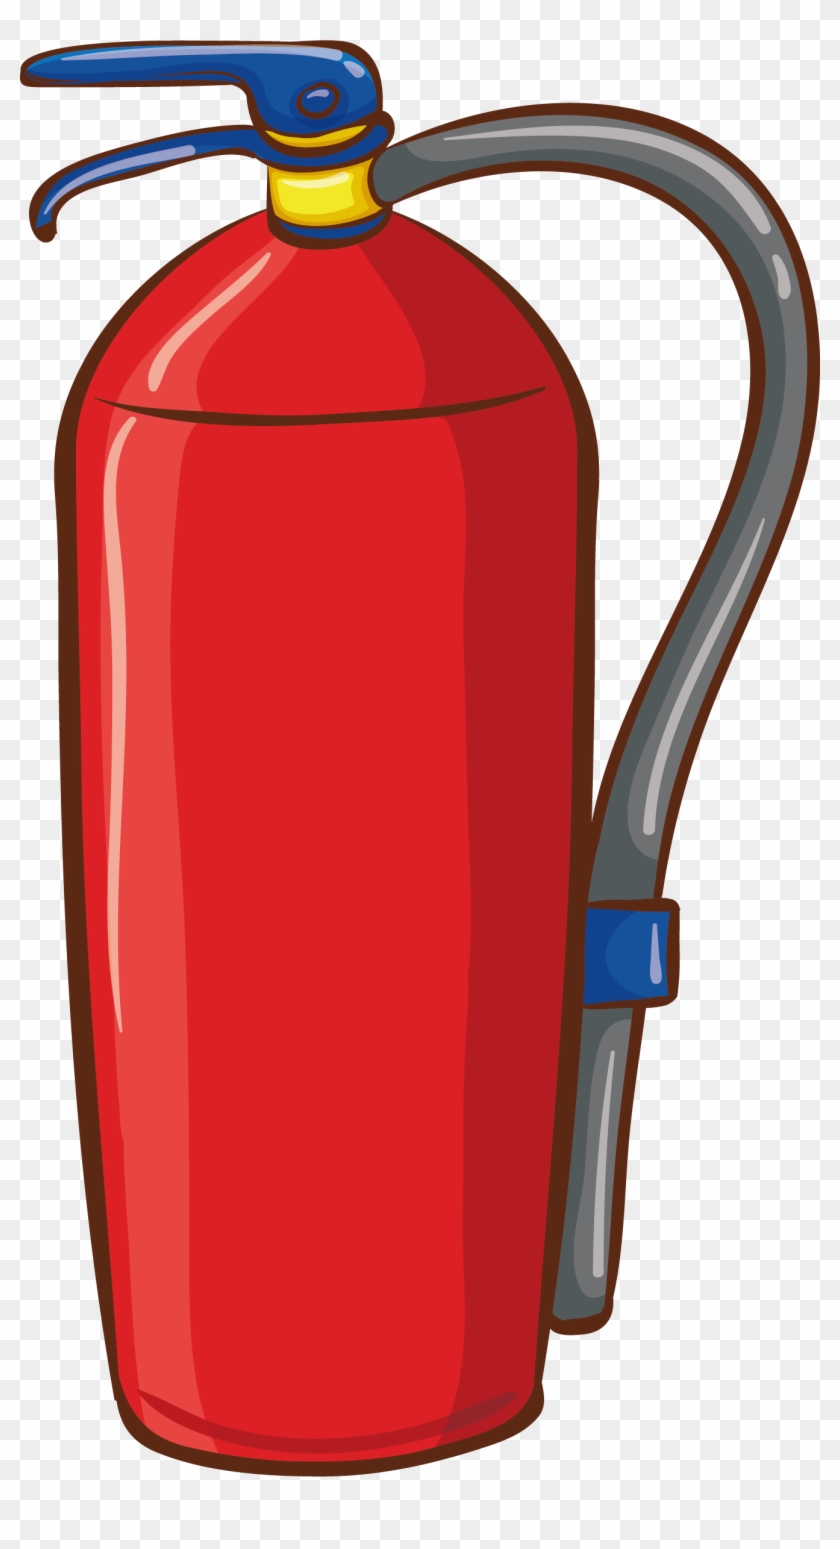 Fire Extinguisher Conflagration Icon - Fire Extinguisher Conflagration Icon #385678